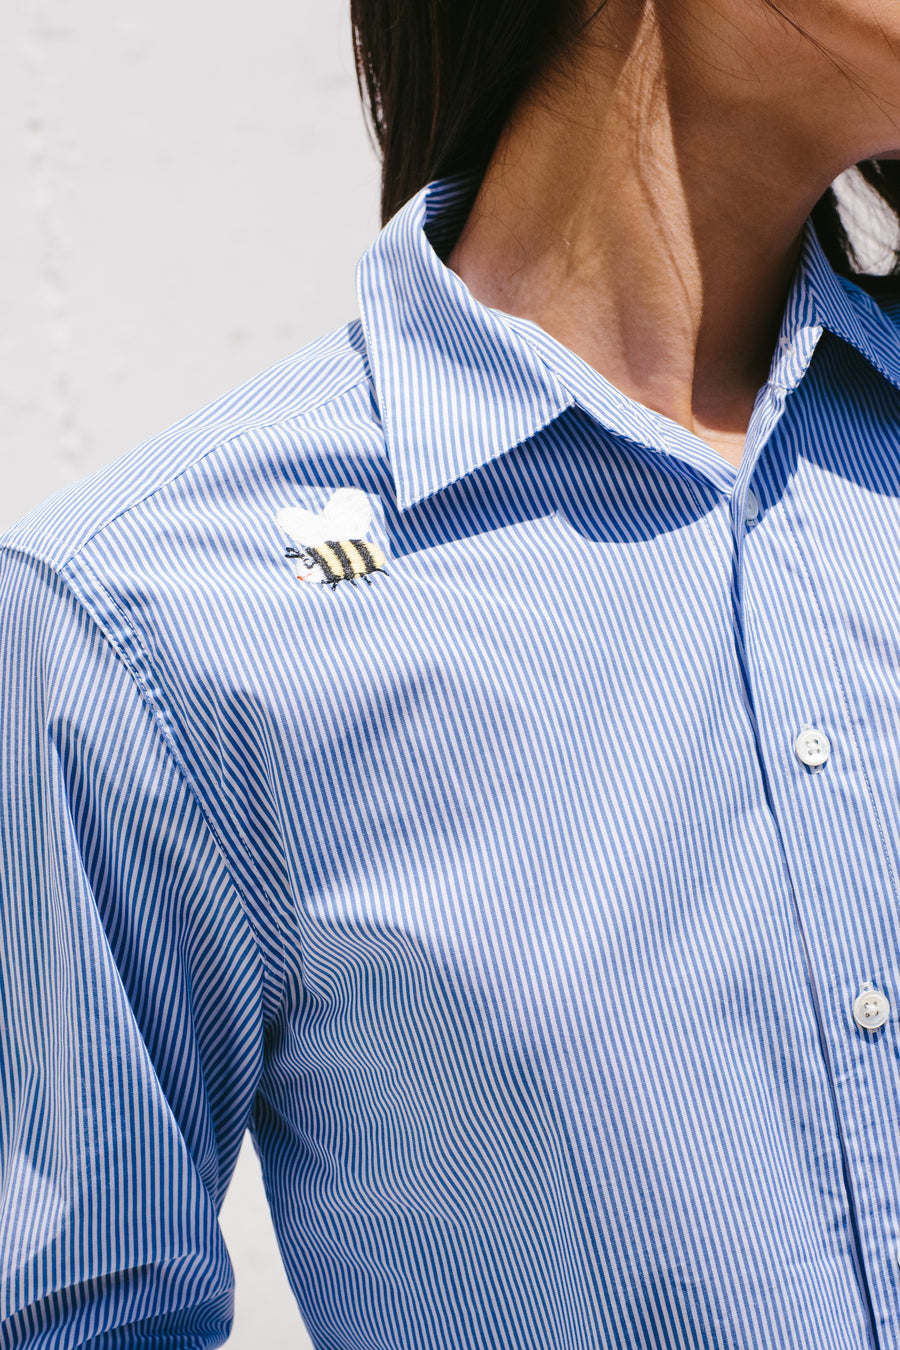 Mira Mikati x Javier Calleja Classic Shirt With Embroidery In White/Blue